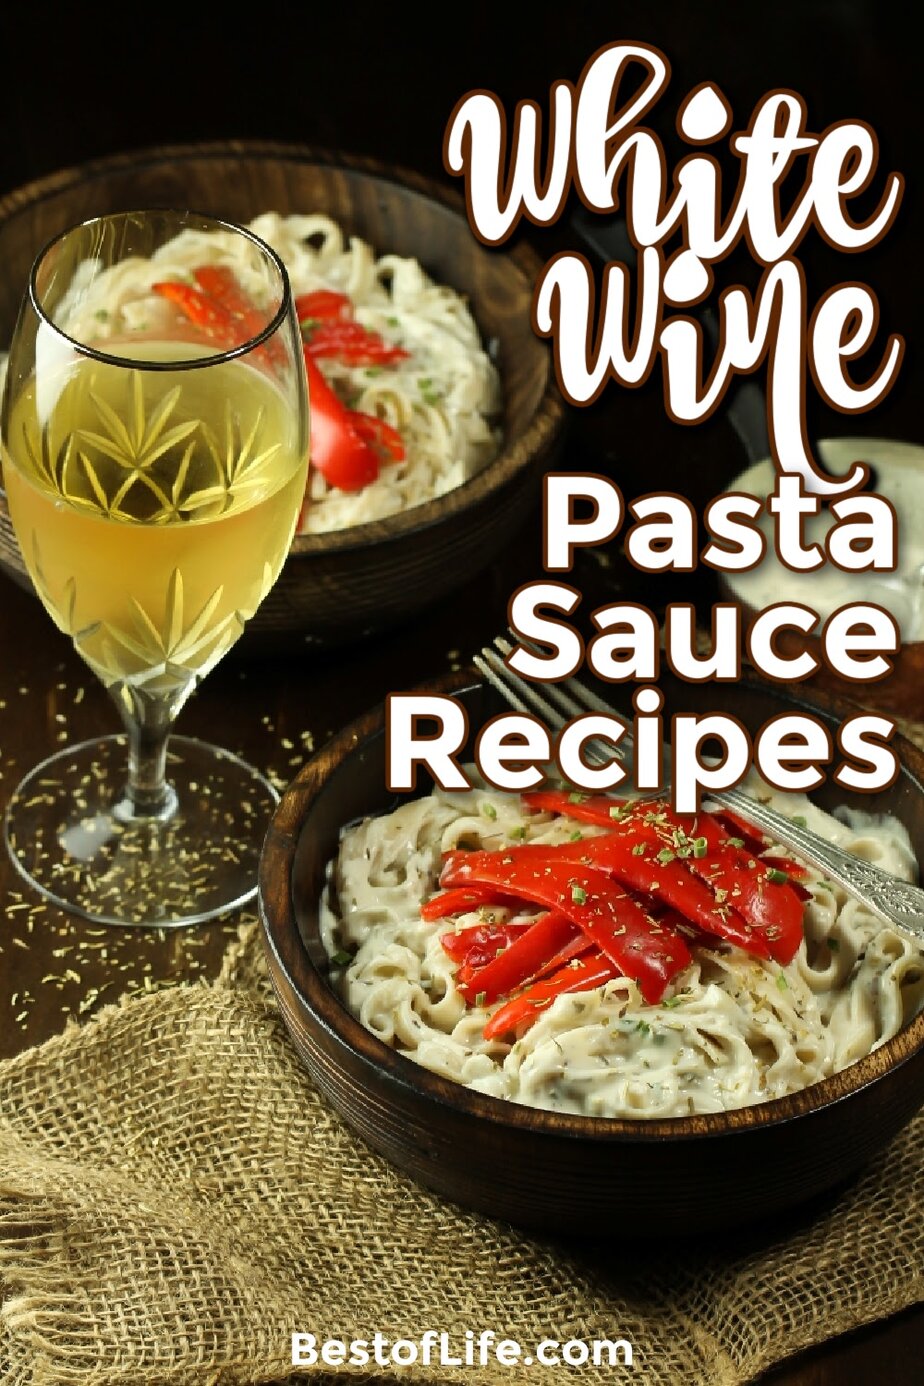 Discover one of the reasons we cook with wine by using white wine pasta sauce recipes for your next meal at home or with friends. Pasta Recipes | White Wine Recipes | Recipes with White Wine | Pasta Recipes with Wine | White Wine Cooking Ideas | Pasta Sauce Ideas | Romantic Recipes for Couples | Date Night Recipes | Dinner Recipes for Two #whitewine #pastarecipes